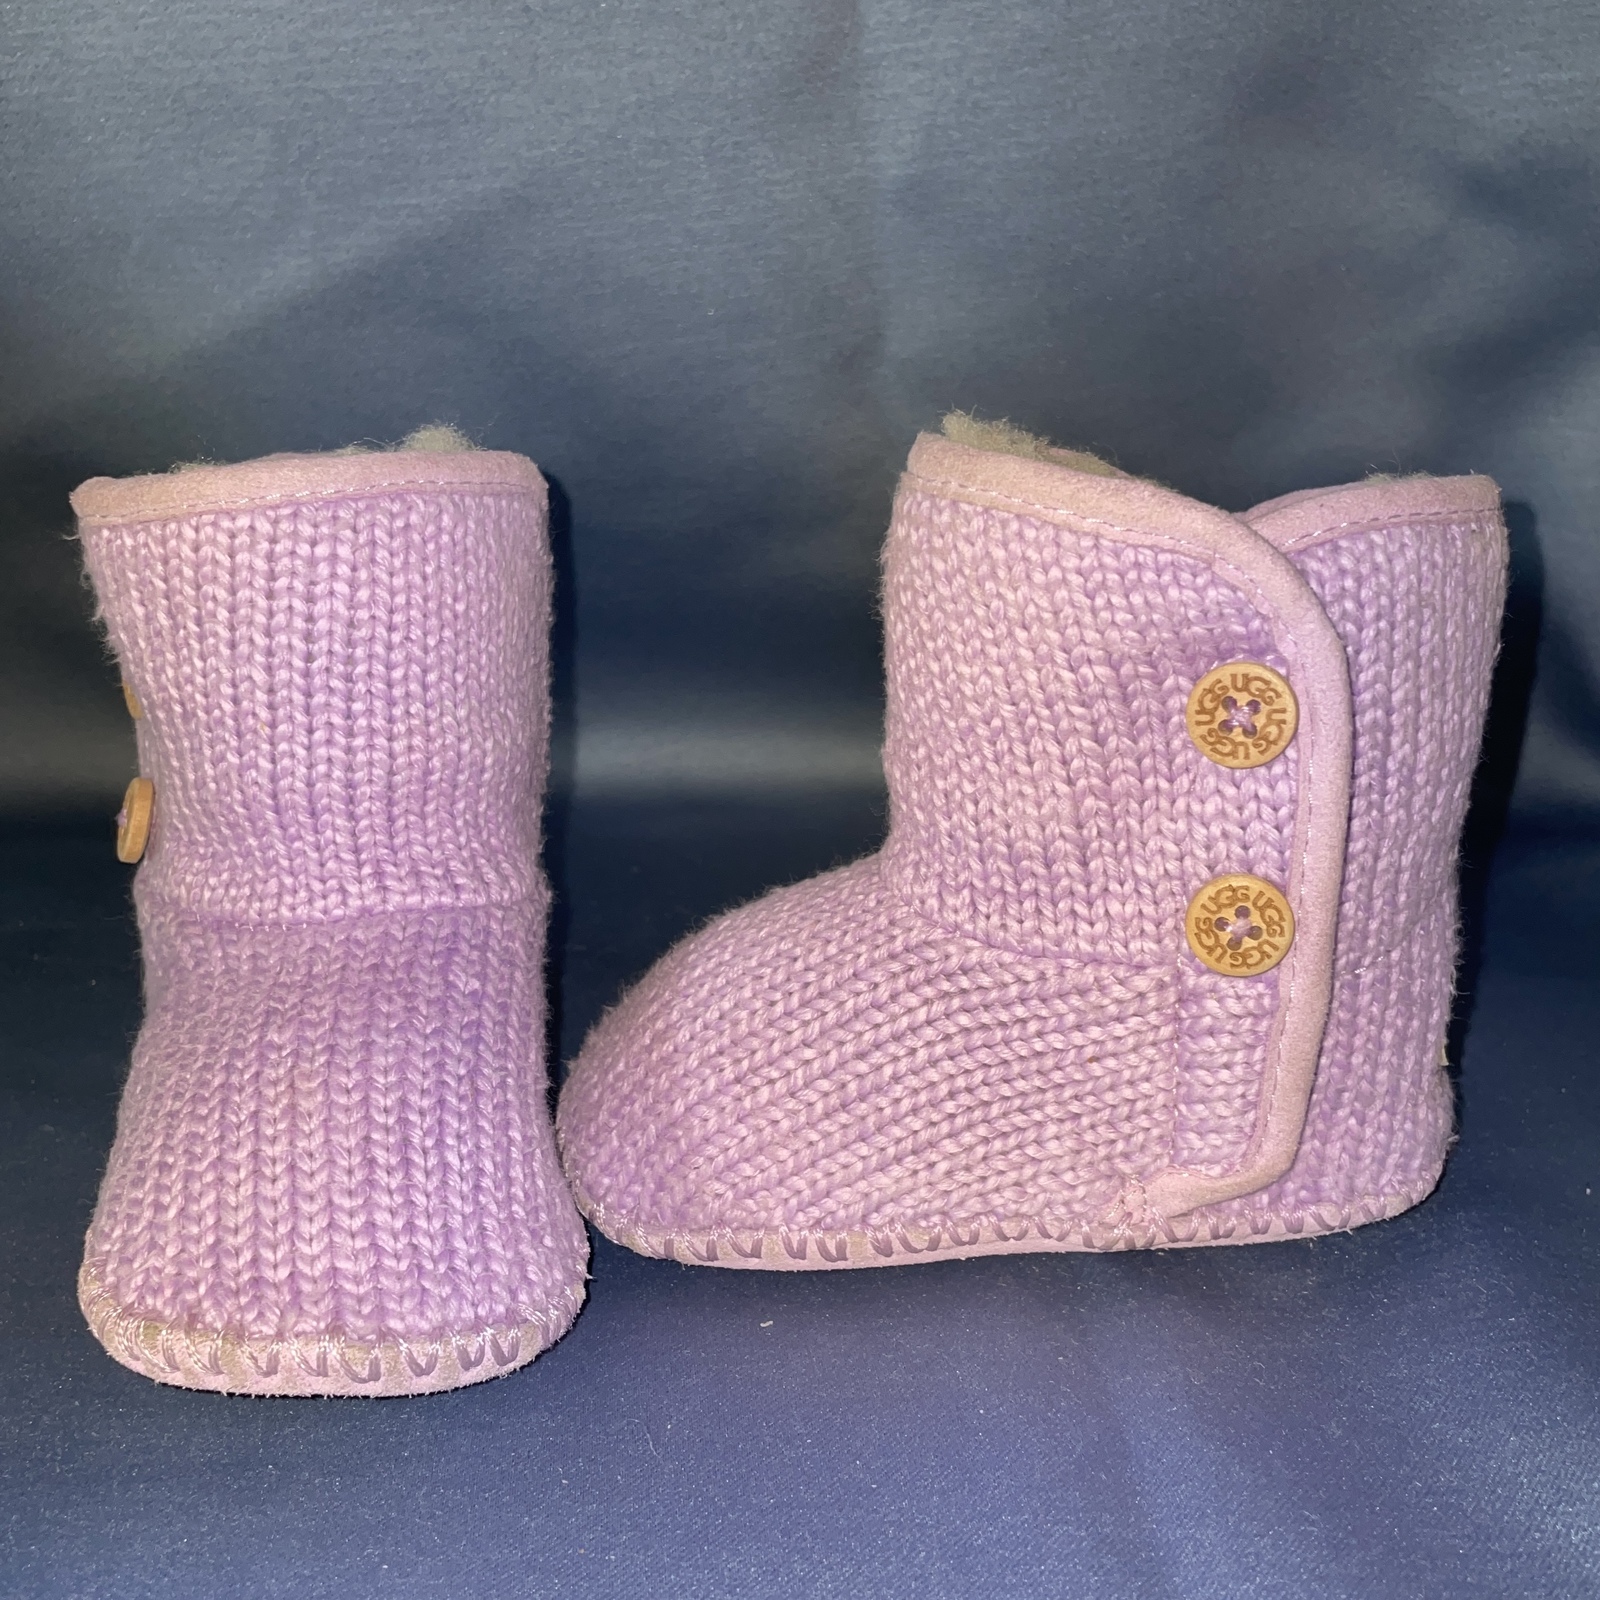 UGG Lilac Knit Baby Bootie PURL, S/N 10051971, Infant Baby size 2/3  - $35.00